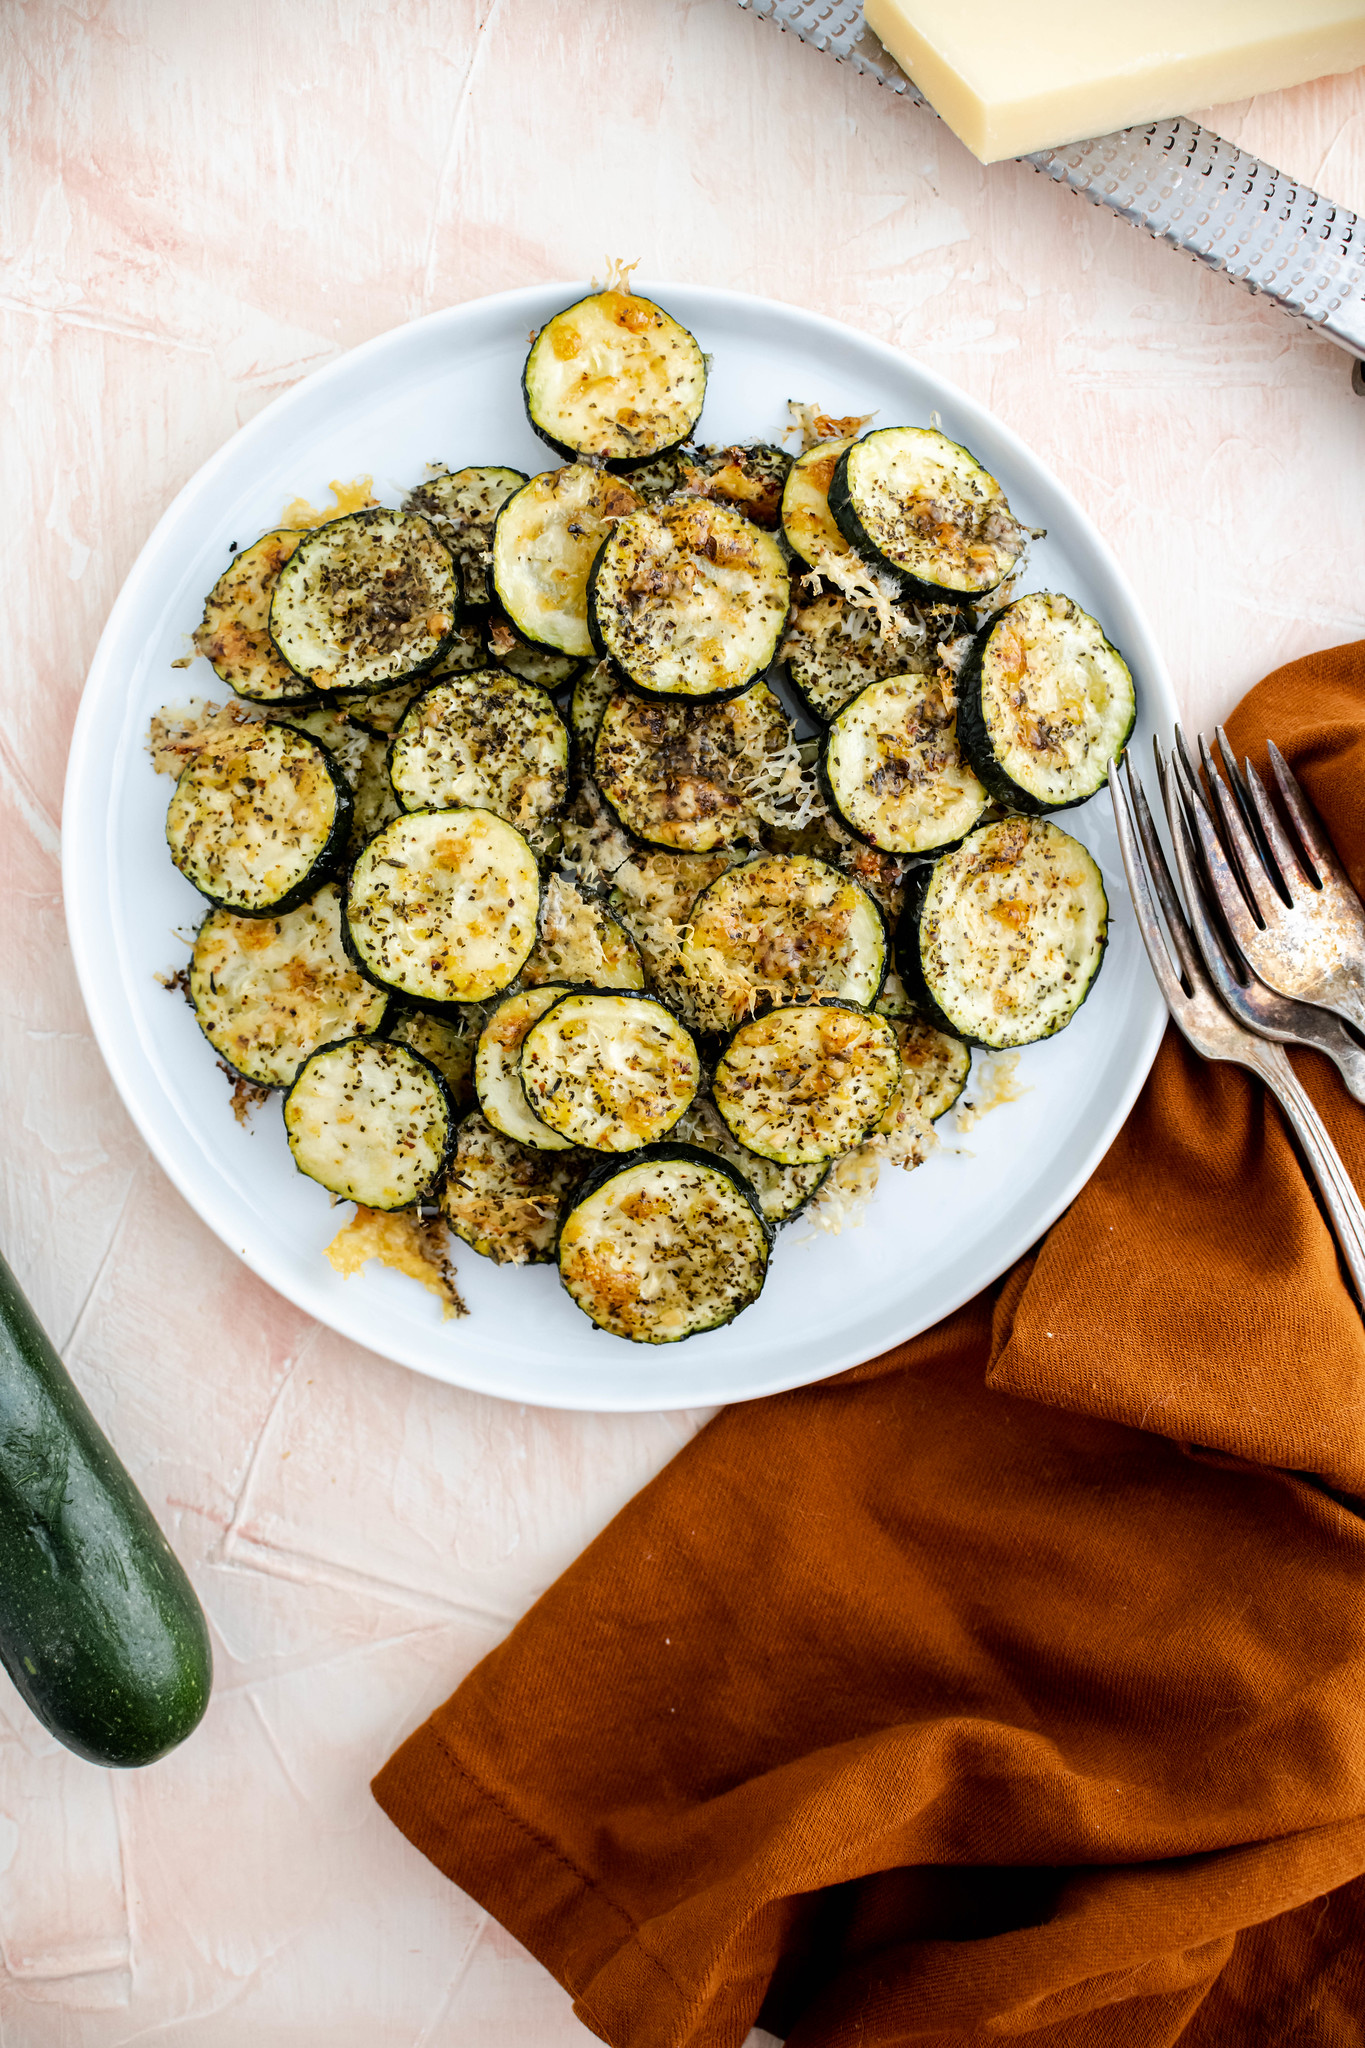 Round white plate filled with parmesan zucchini slices.